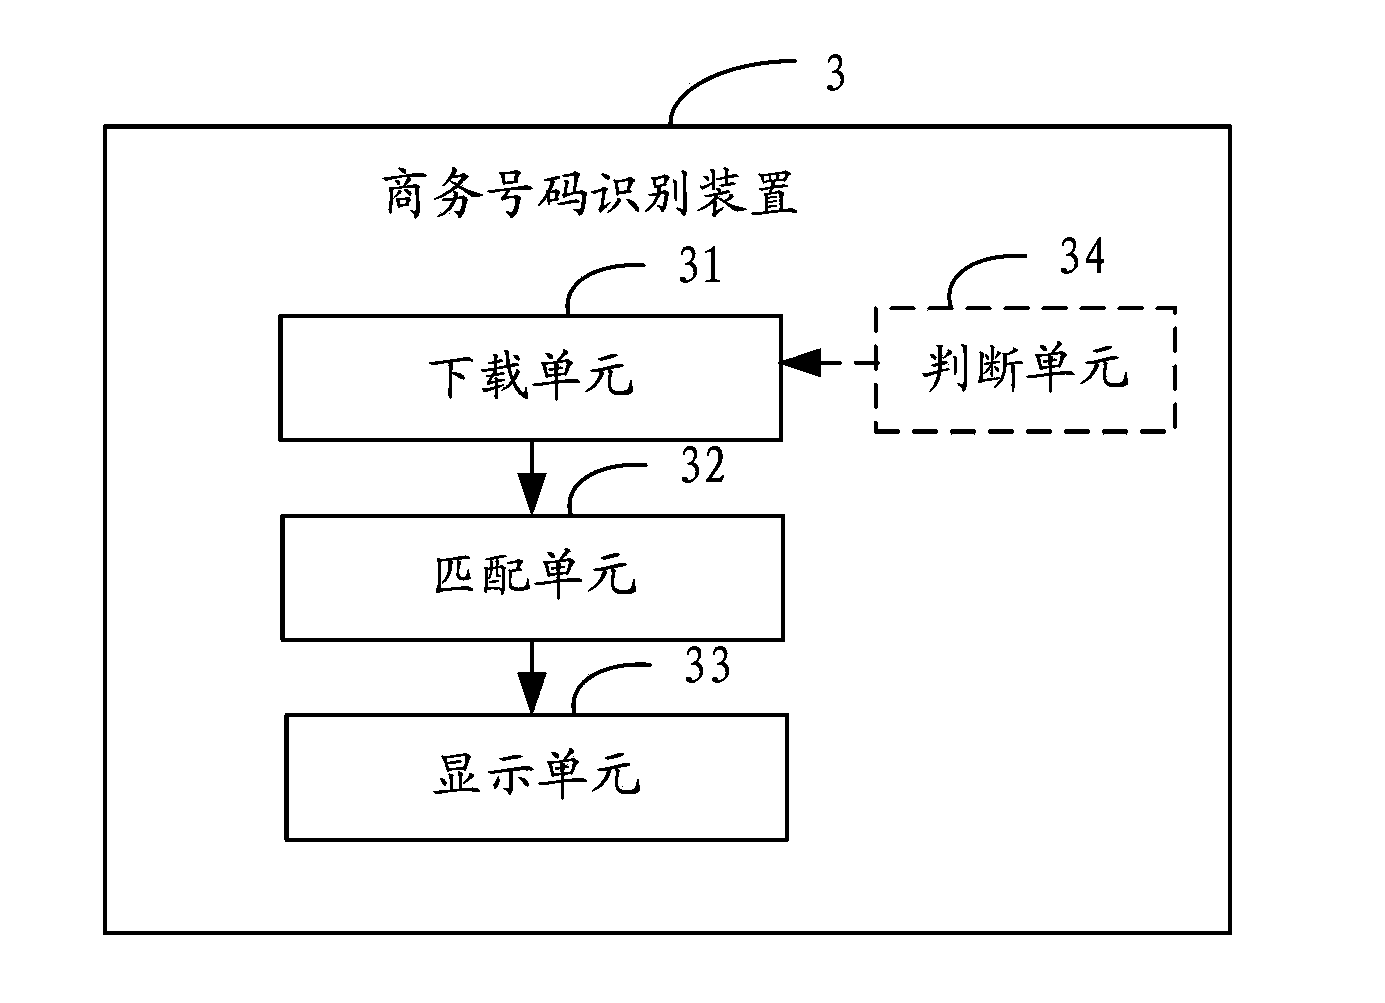 Method and apparatus for information number identification